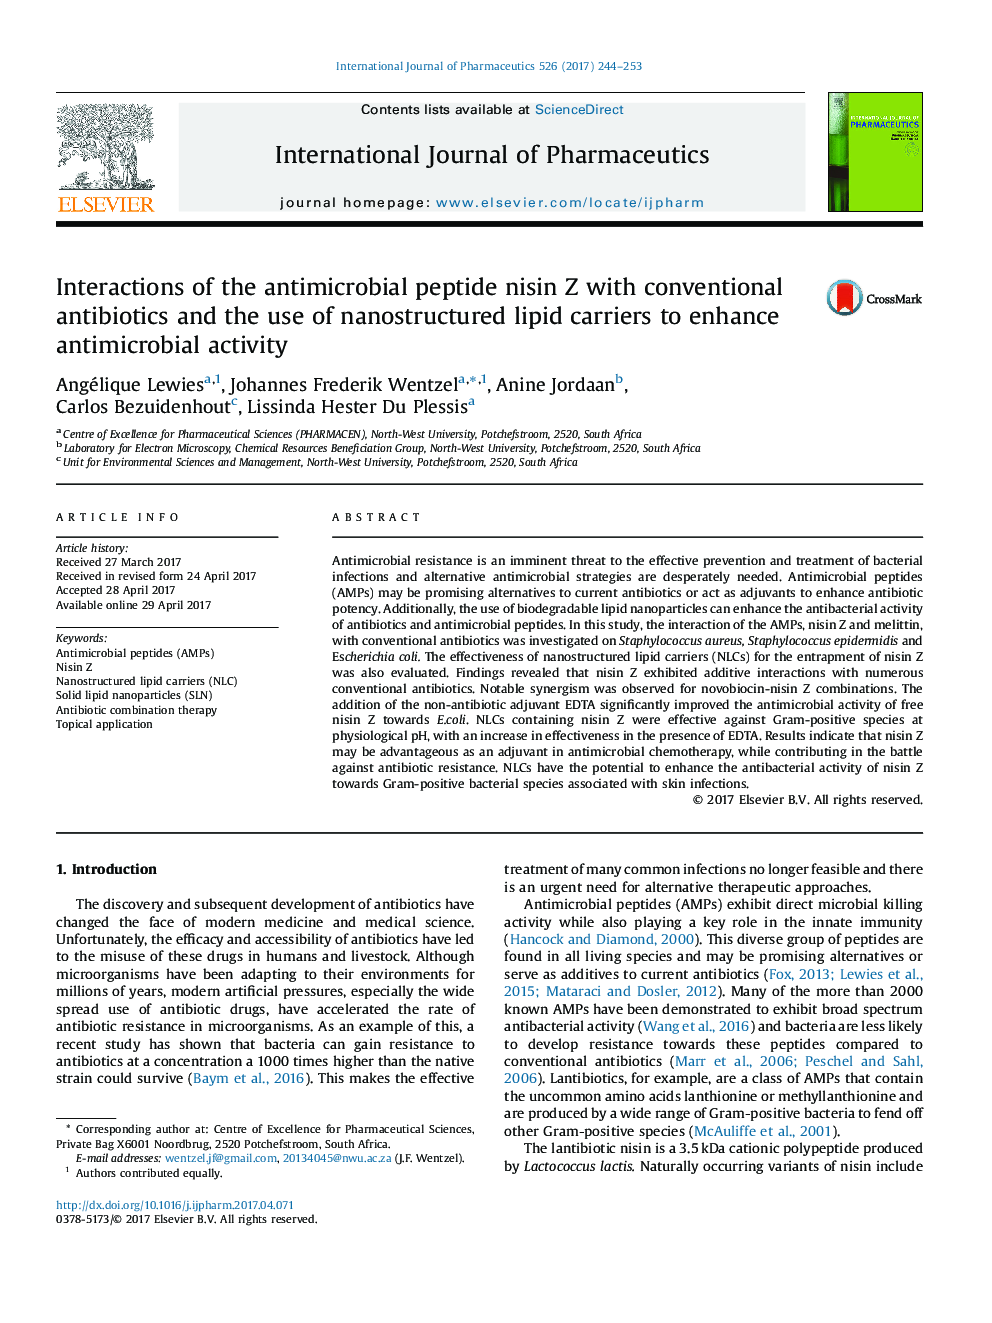 Interactions of the antimicrobial peptide nisin Z with conventional antibiotics and the use of nanostructured lipid carriers to enhance antimicrobial activity